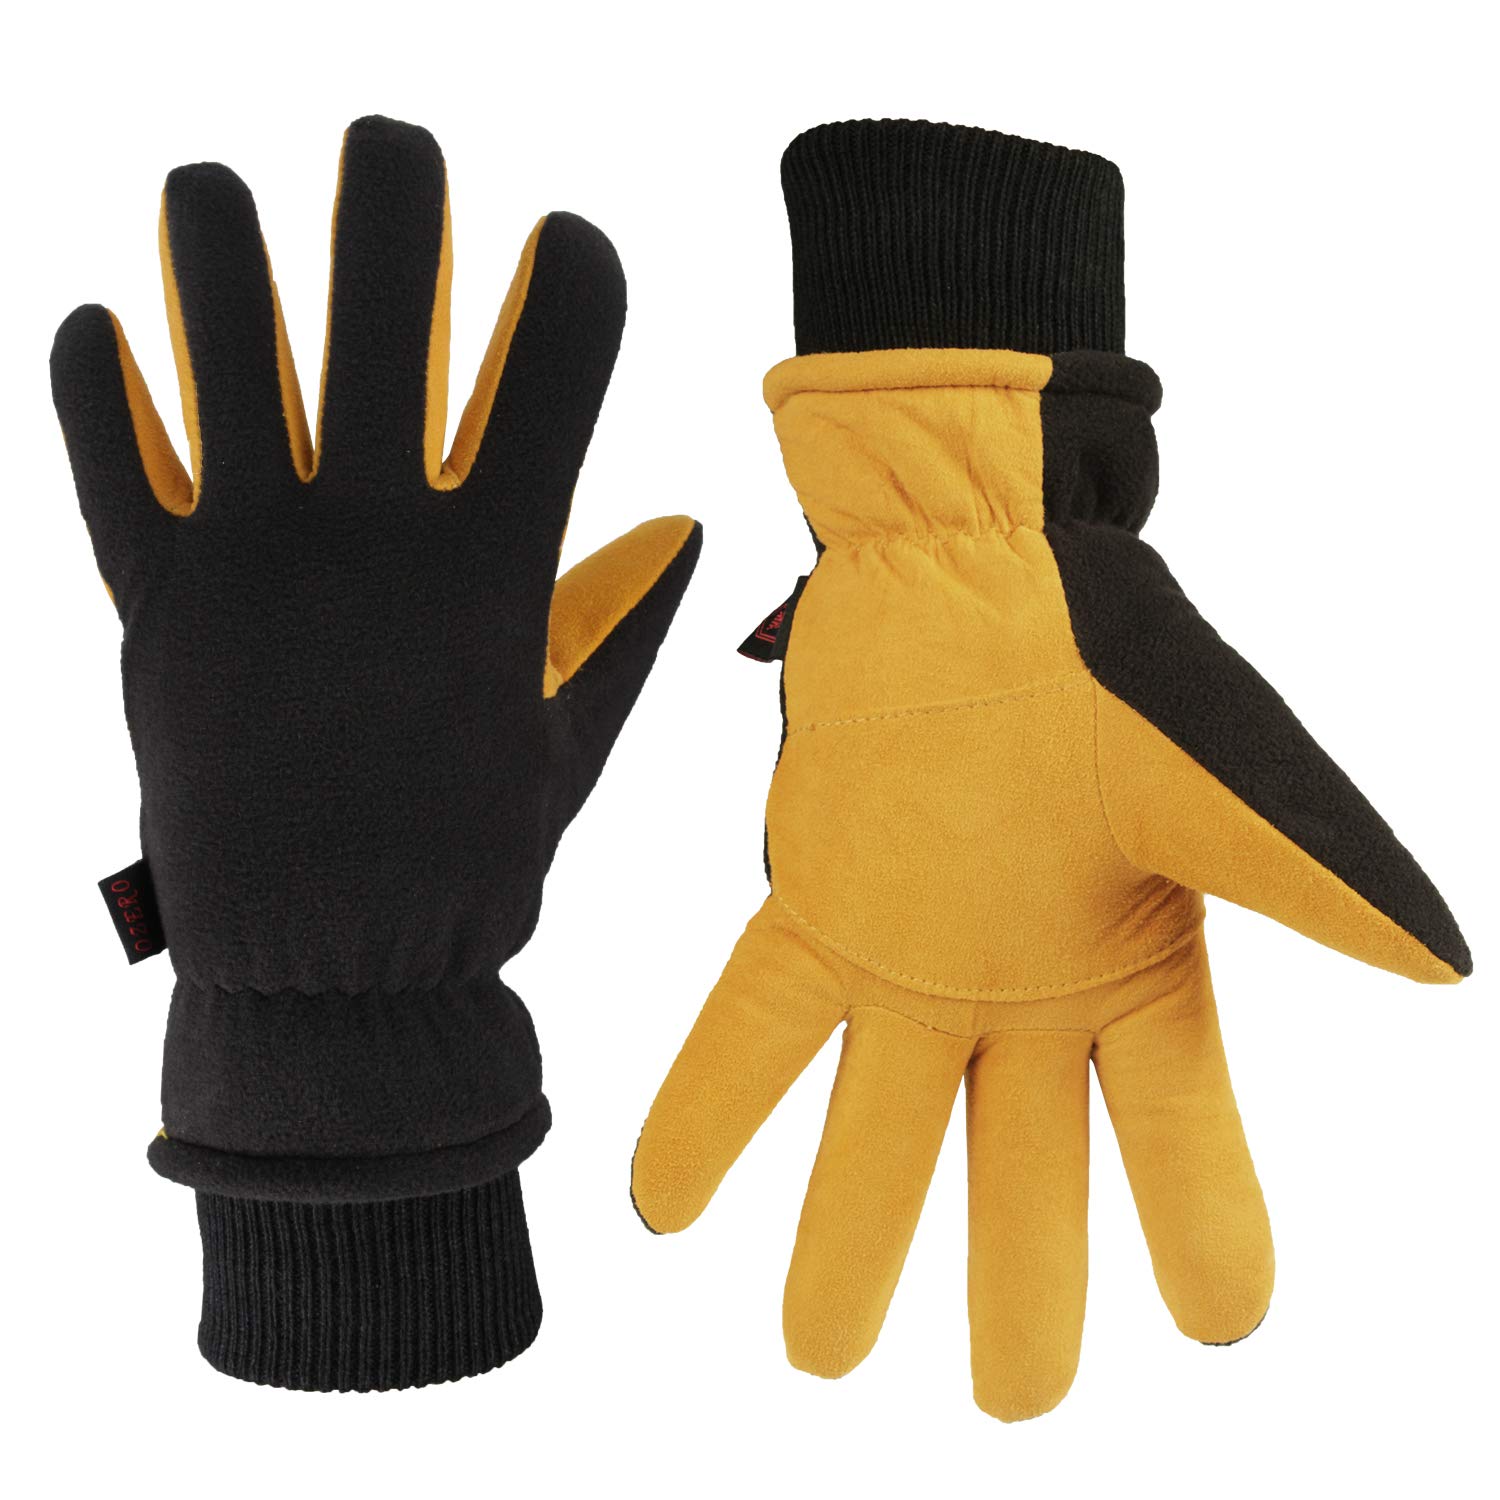 OZERO Winter Gloves for Men Women: Water-Resistant Thick Cold Weather Gloves with Deerskin Suede Leather Palm for Driving Bike Riding Hiking Snow Skiing Tan-Black Small